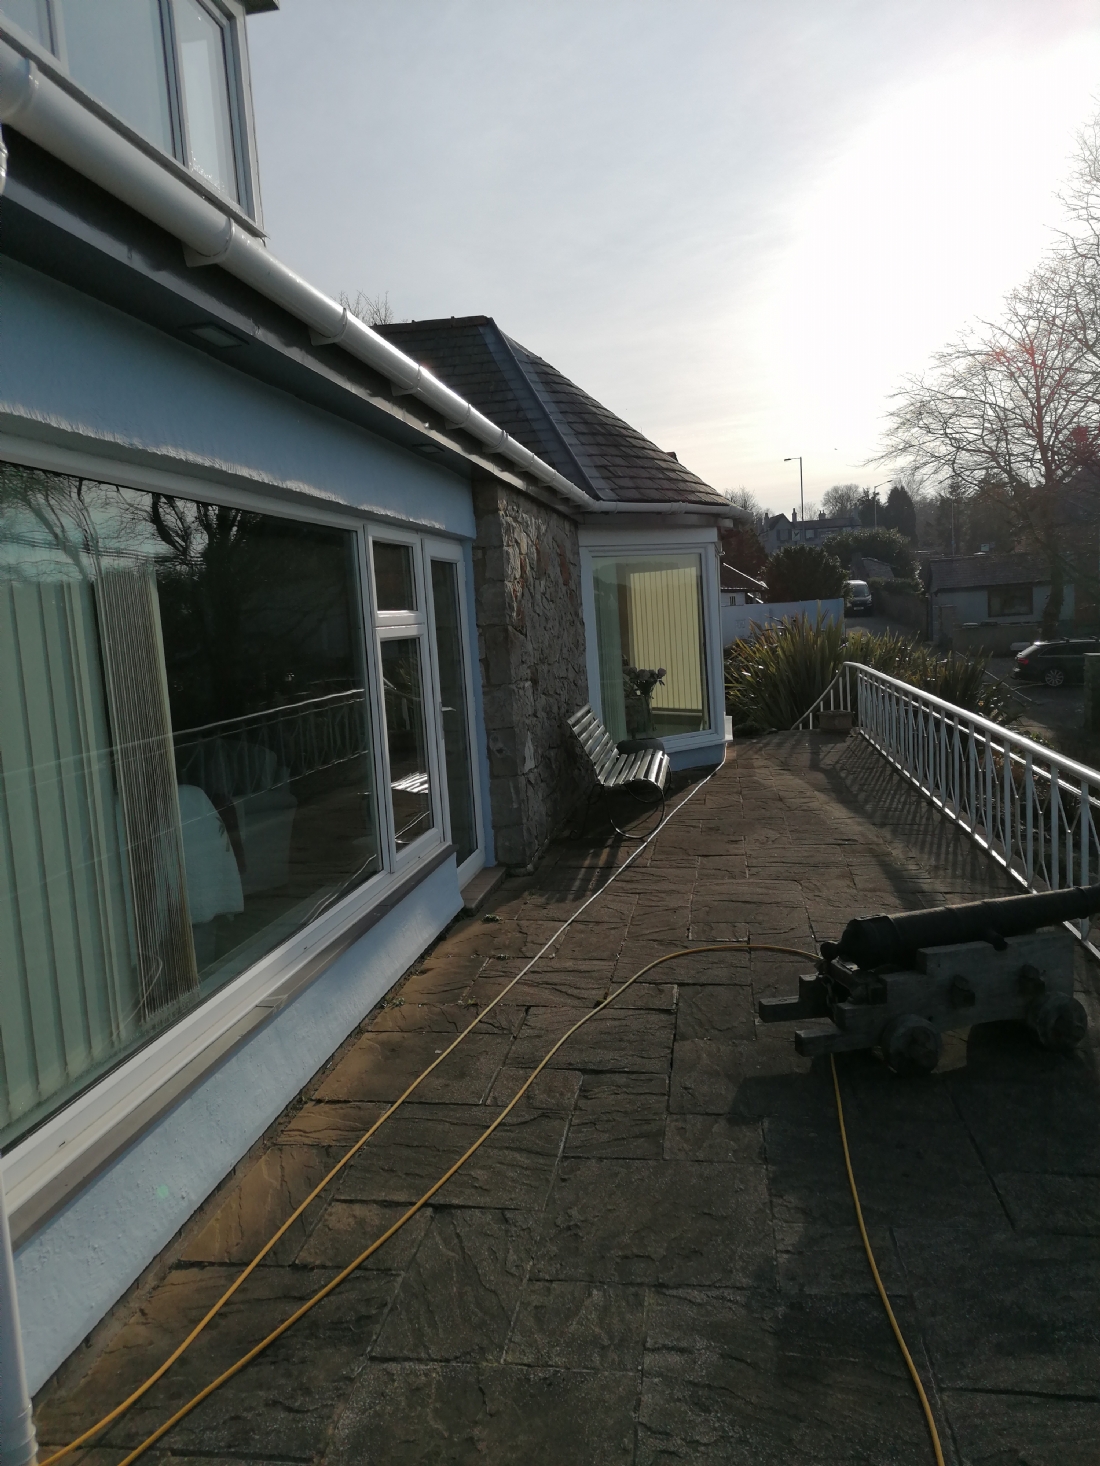 Window cleaning, gutter and fascia cleaning Menai Bridge Anglesey